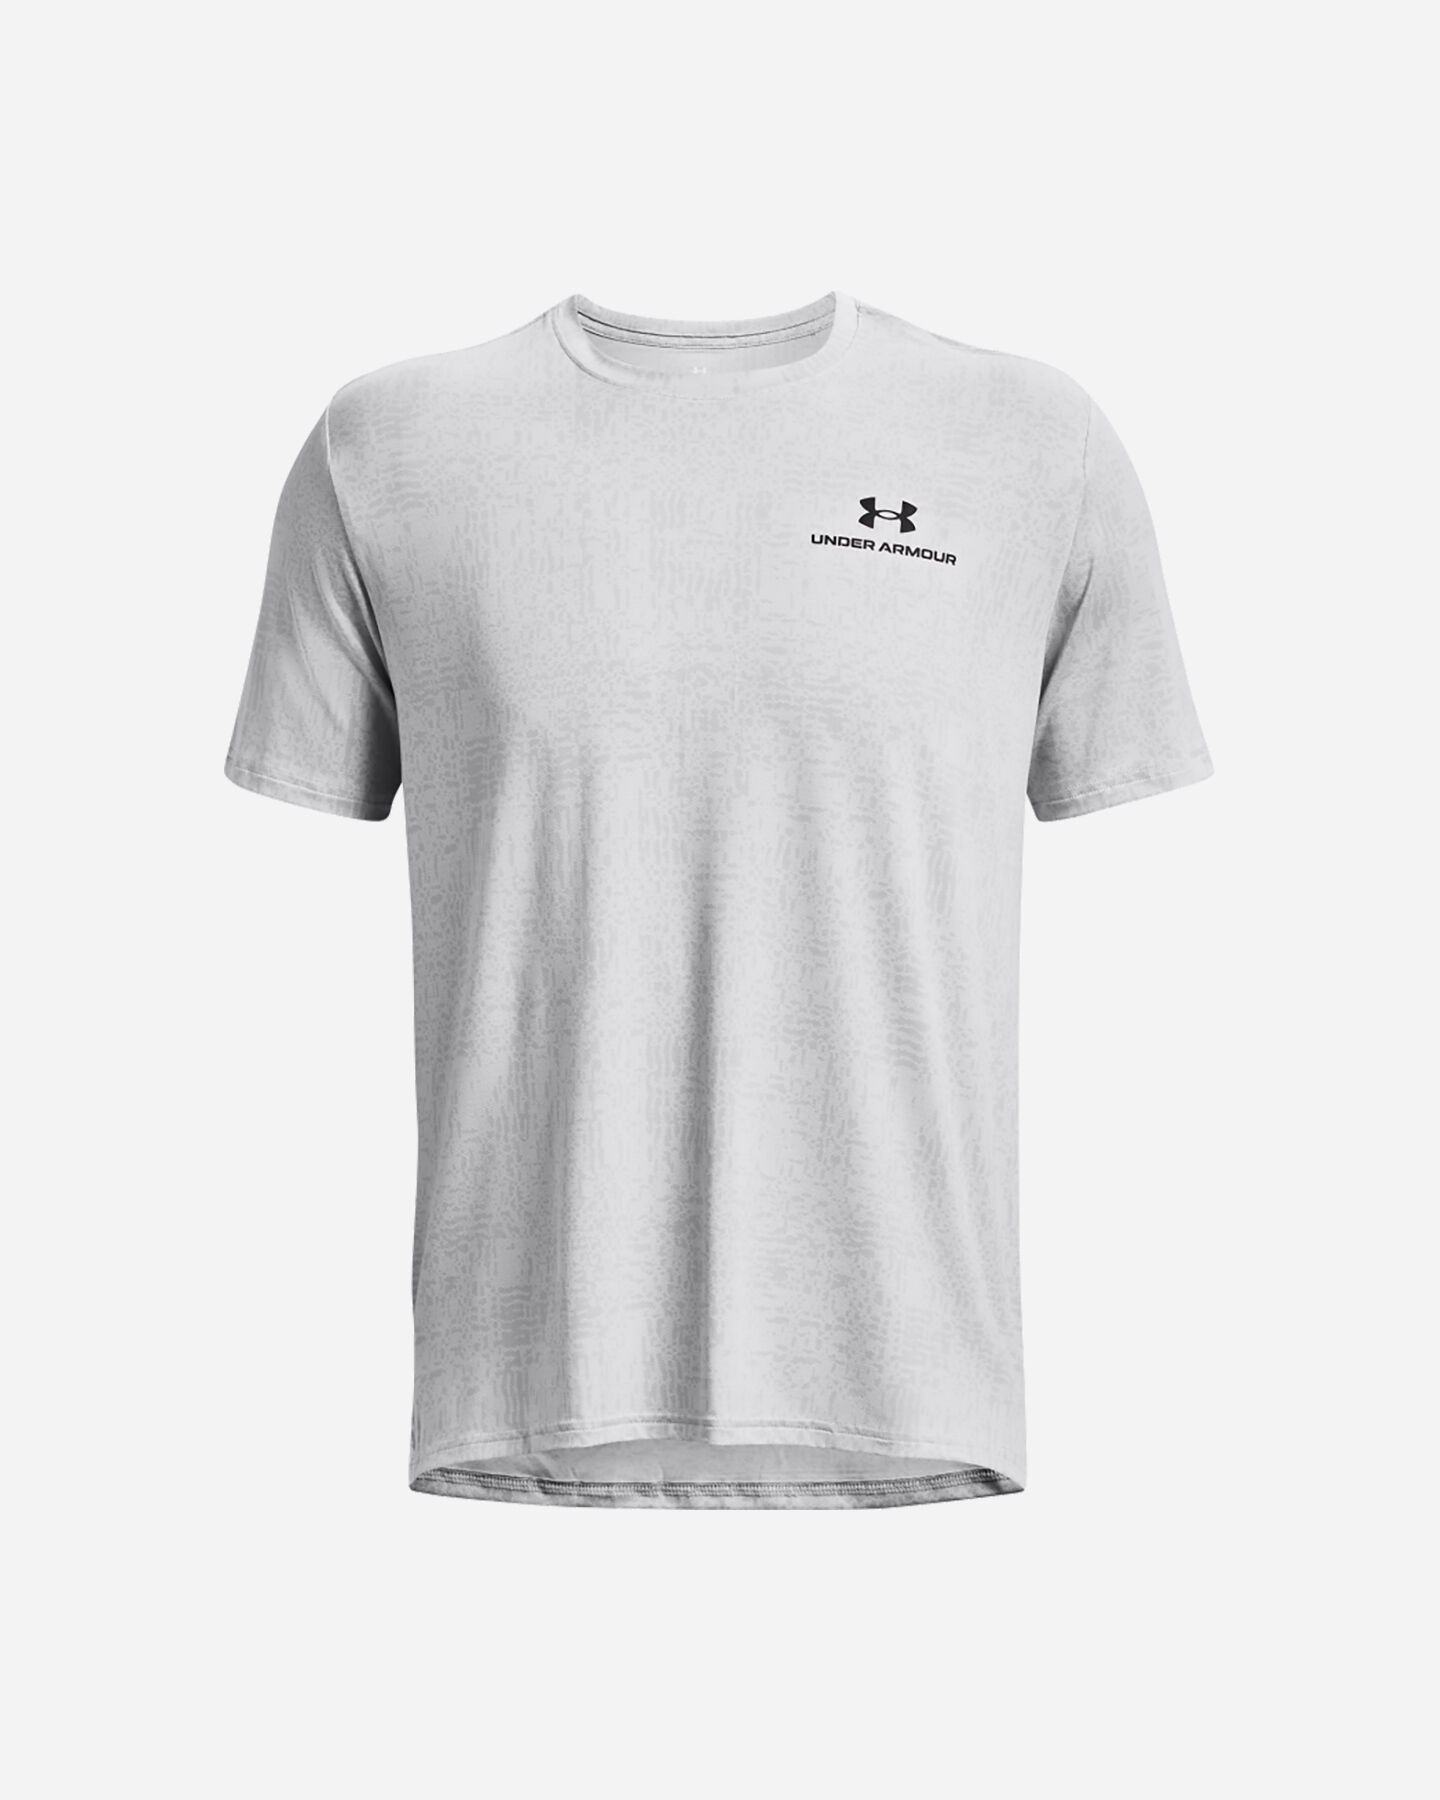  T-Shirt training UNDER ARMOUR RUSH ENERGY M S5579117|0011|XS scatto 0